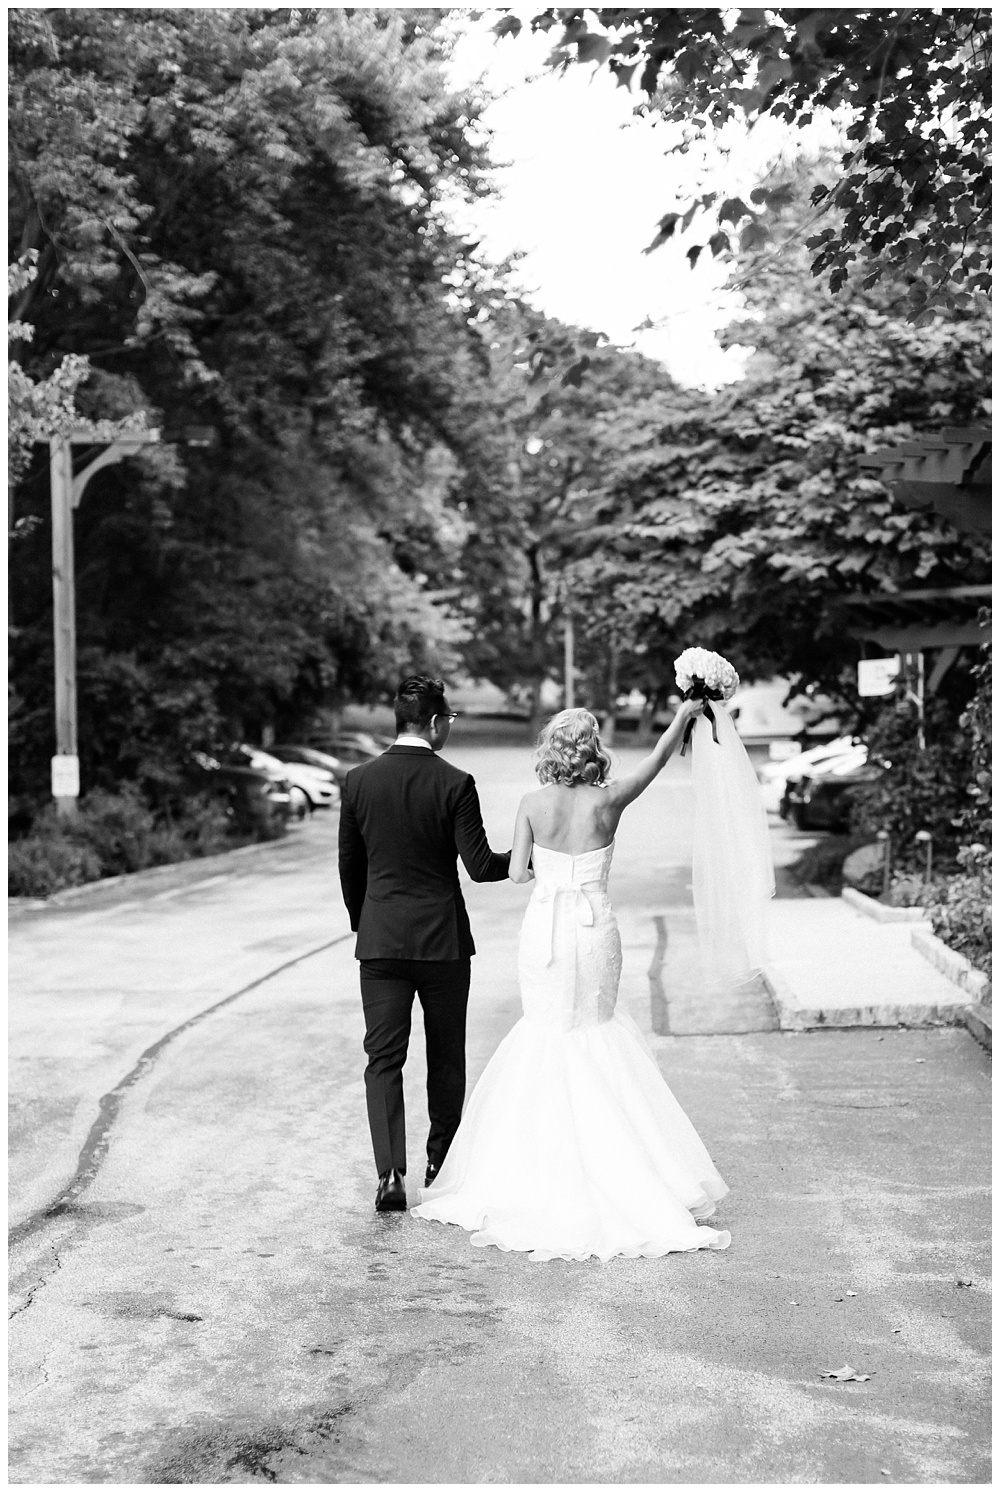 Bride and groom walking down street in Radnor PA by film photographer AGS Photo Art